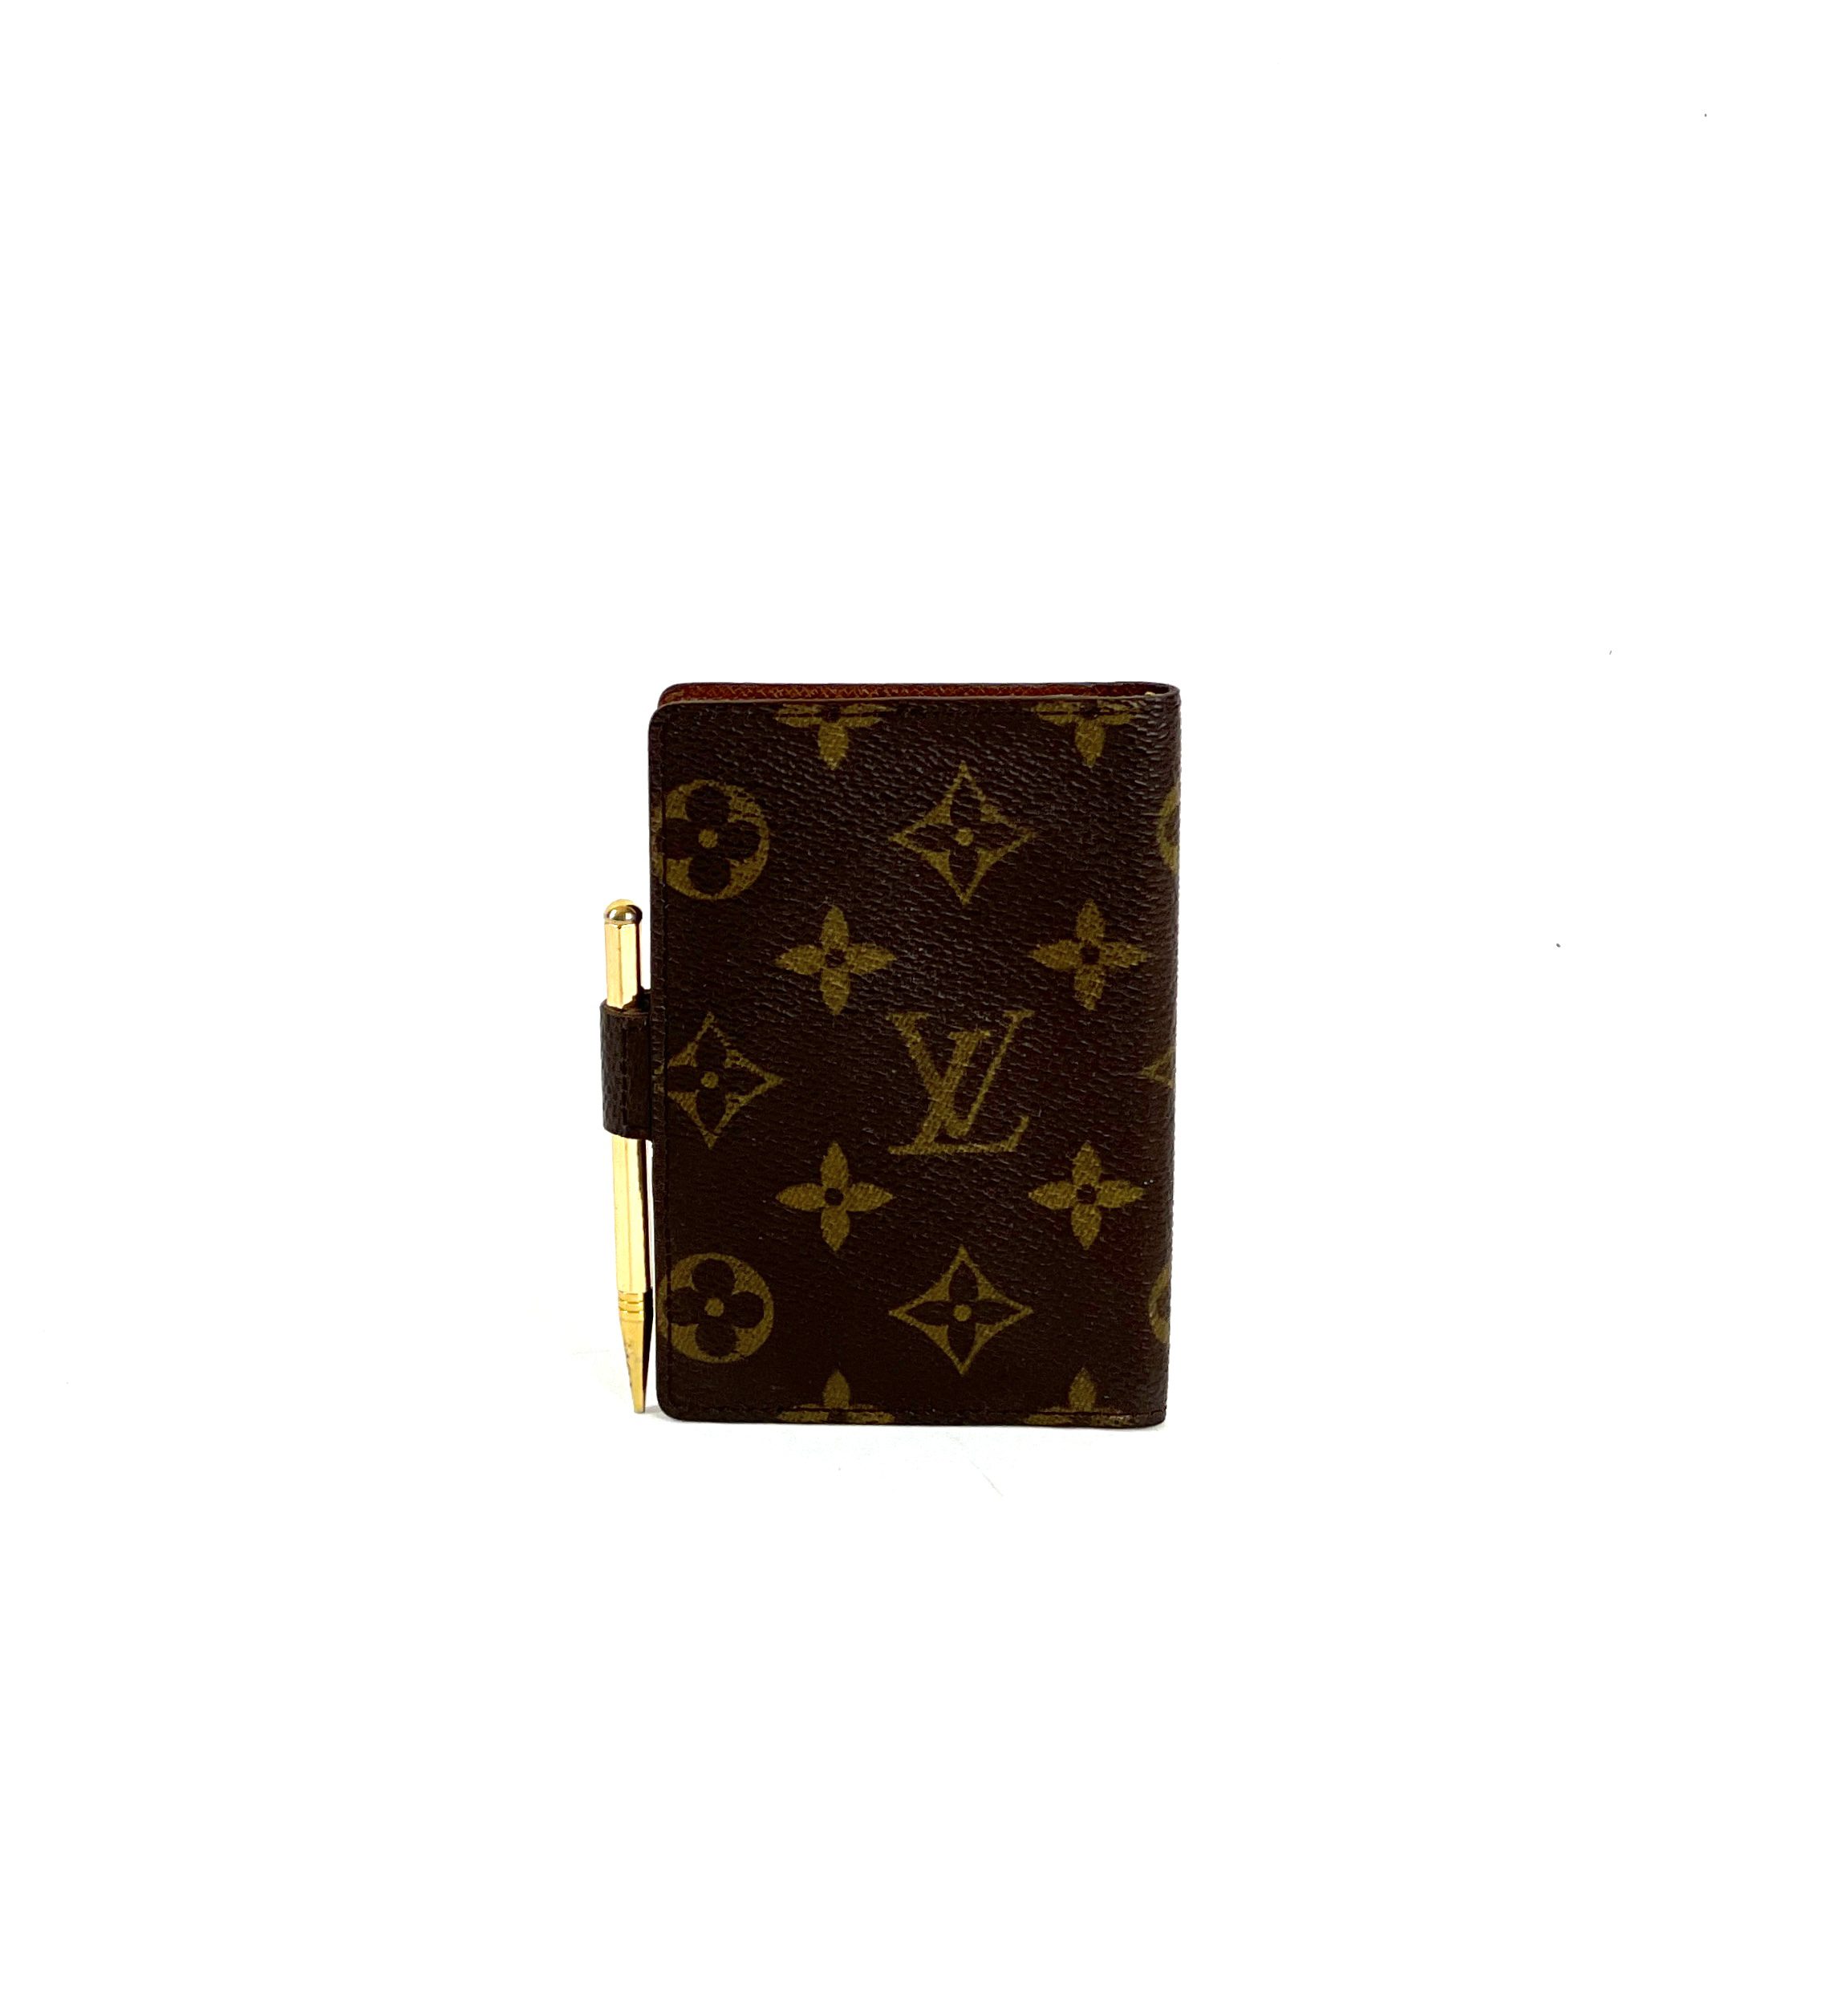 Pre-Owned Louis Vuitton Agend French Wallt in Monogram Canva